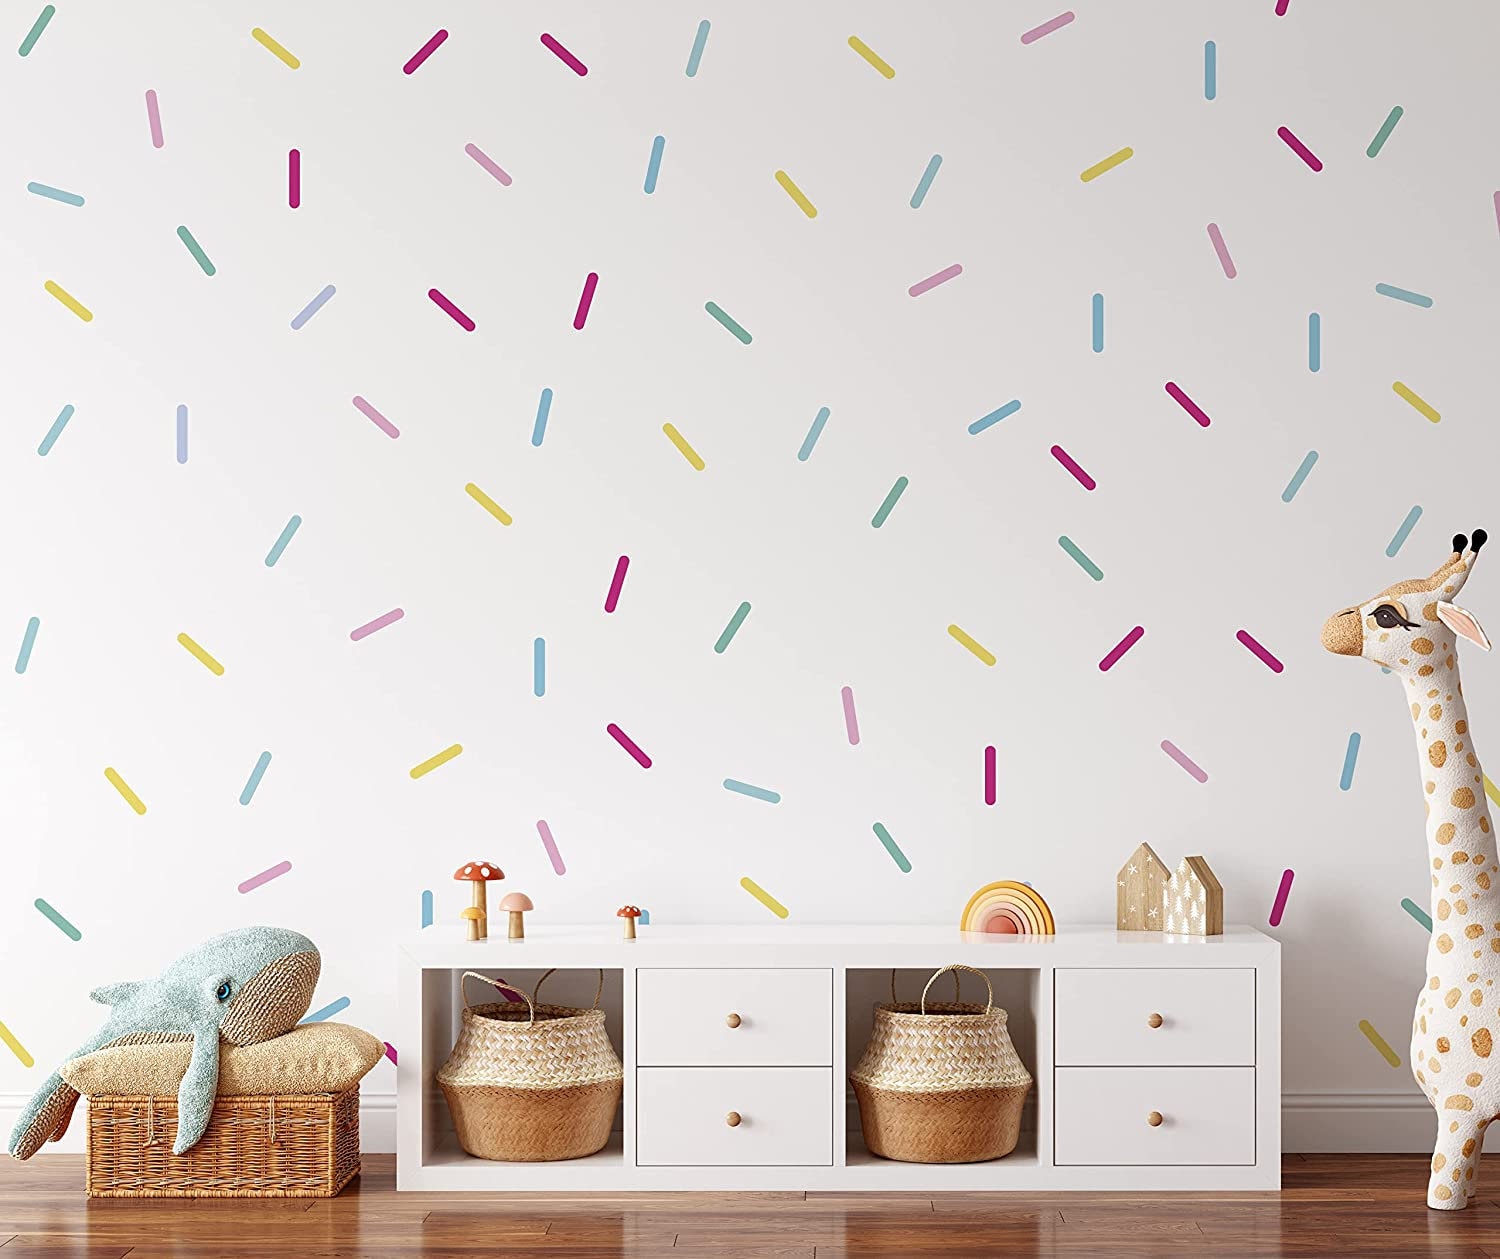 Colour Sprinkles Wall Stickers For Kids Room, Sprinkle Wall Stickers, Sprinkle Wall Decals For Children's Bedrooms Nursery Playroom Confetti